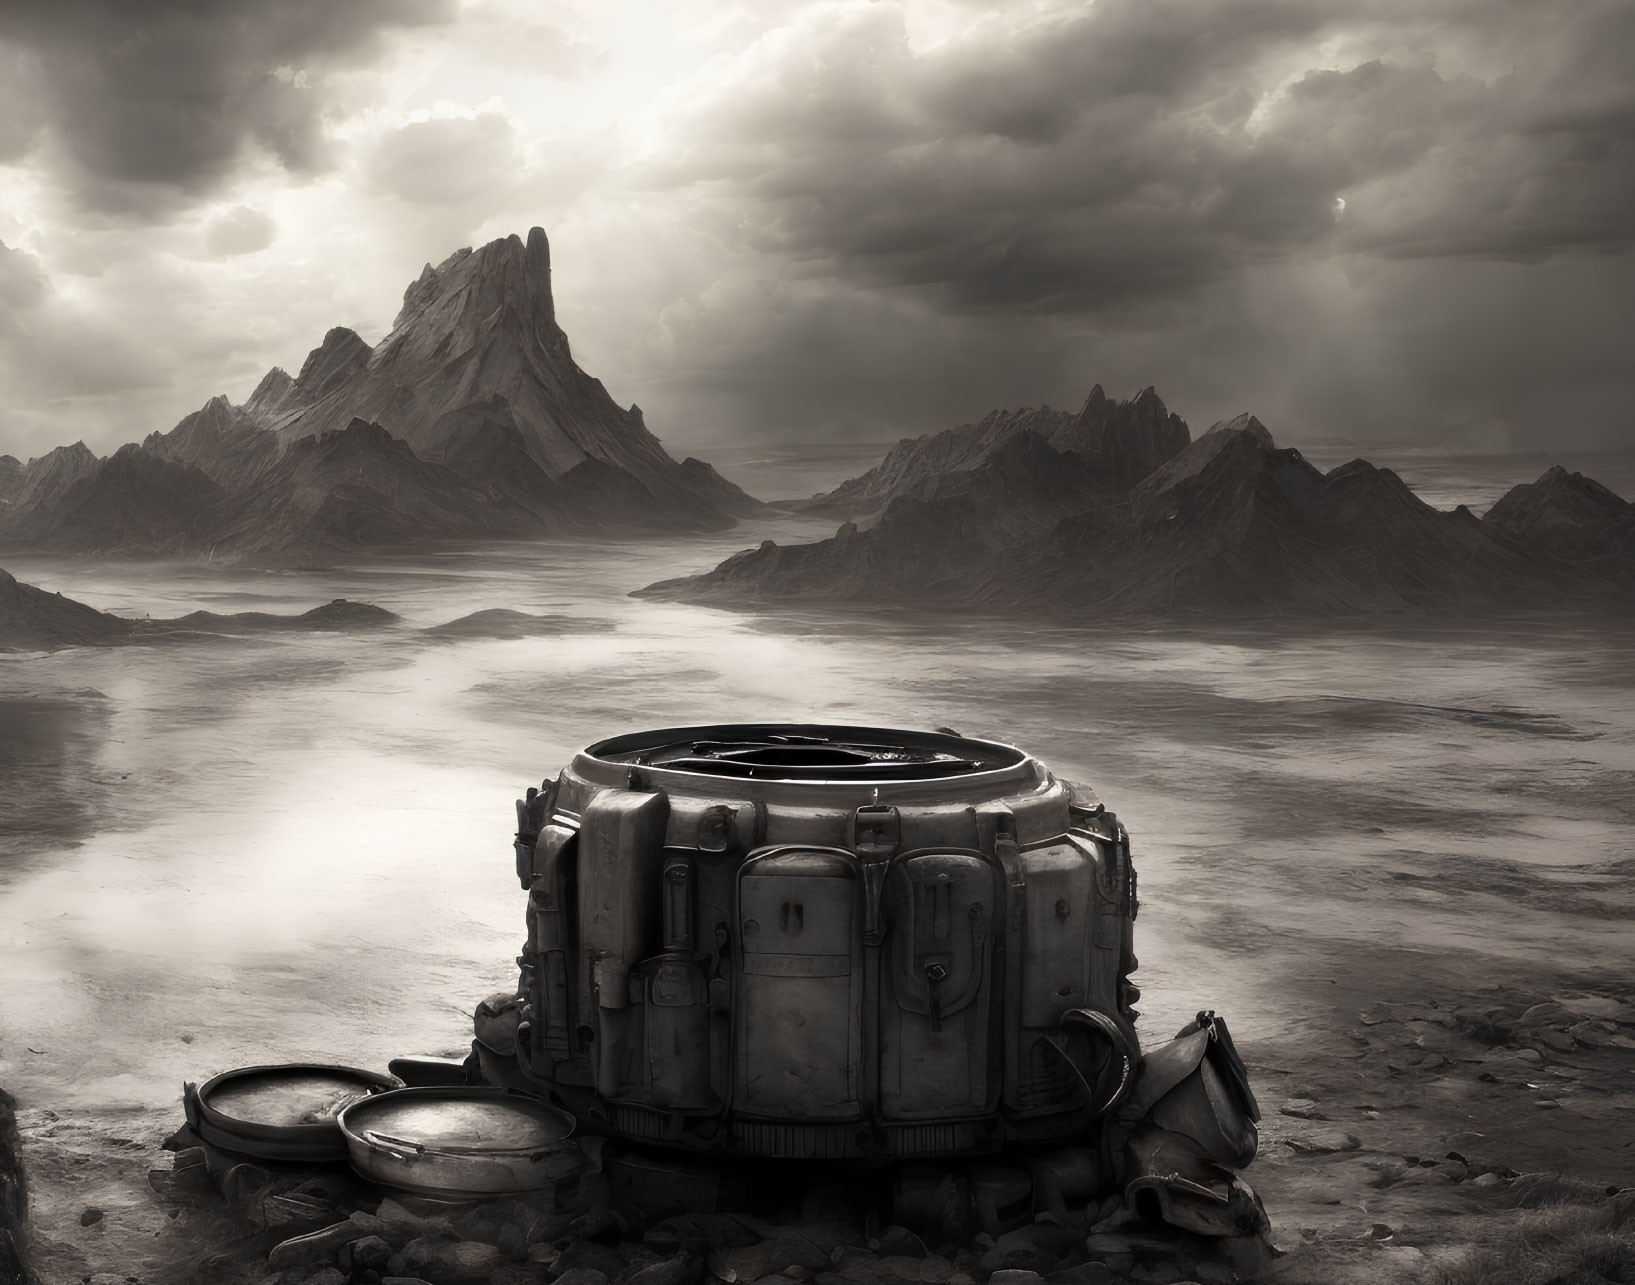 Monochrome landscape with jagged mountains and futuristic structure